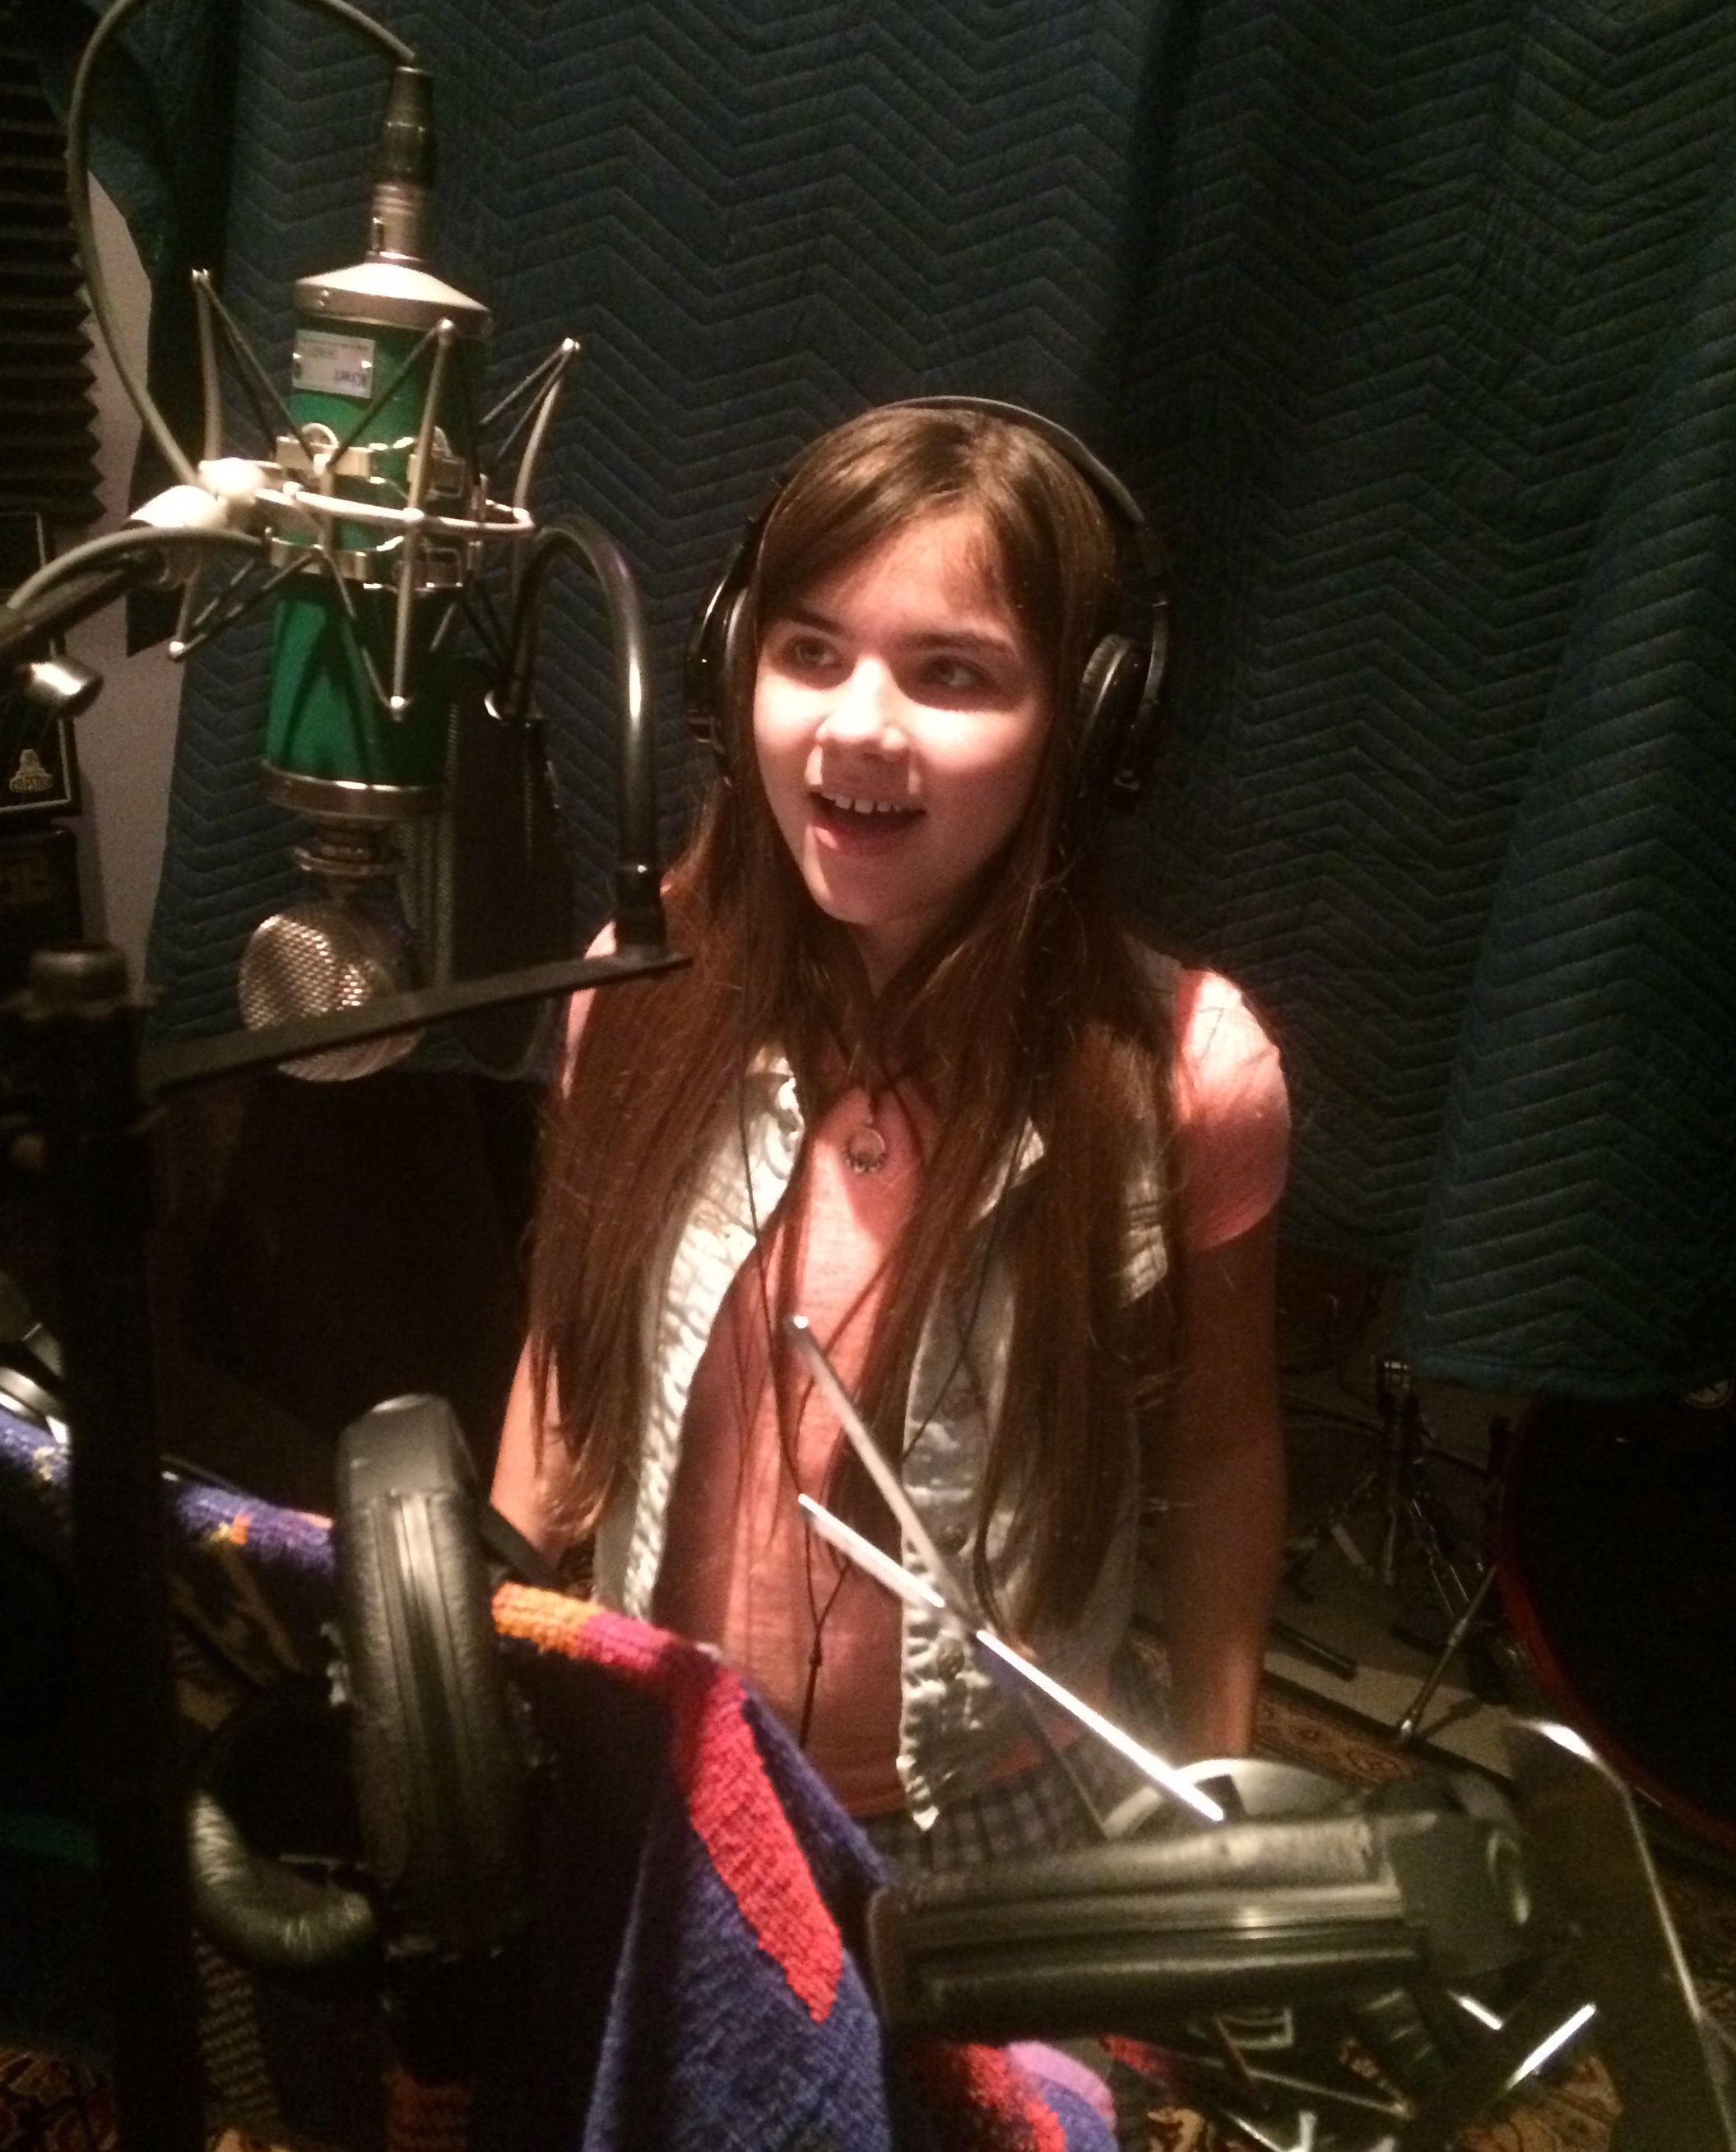 Kadah working on a voice over/singing project